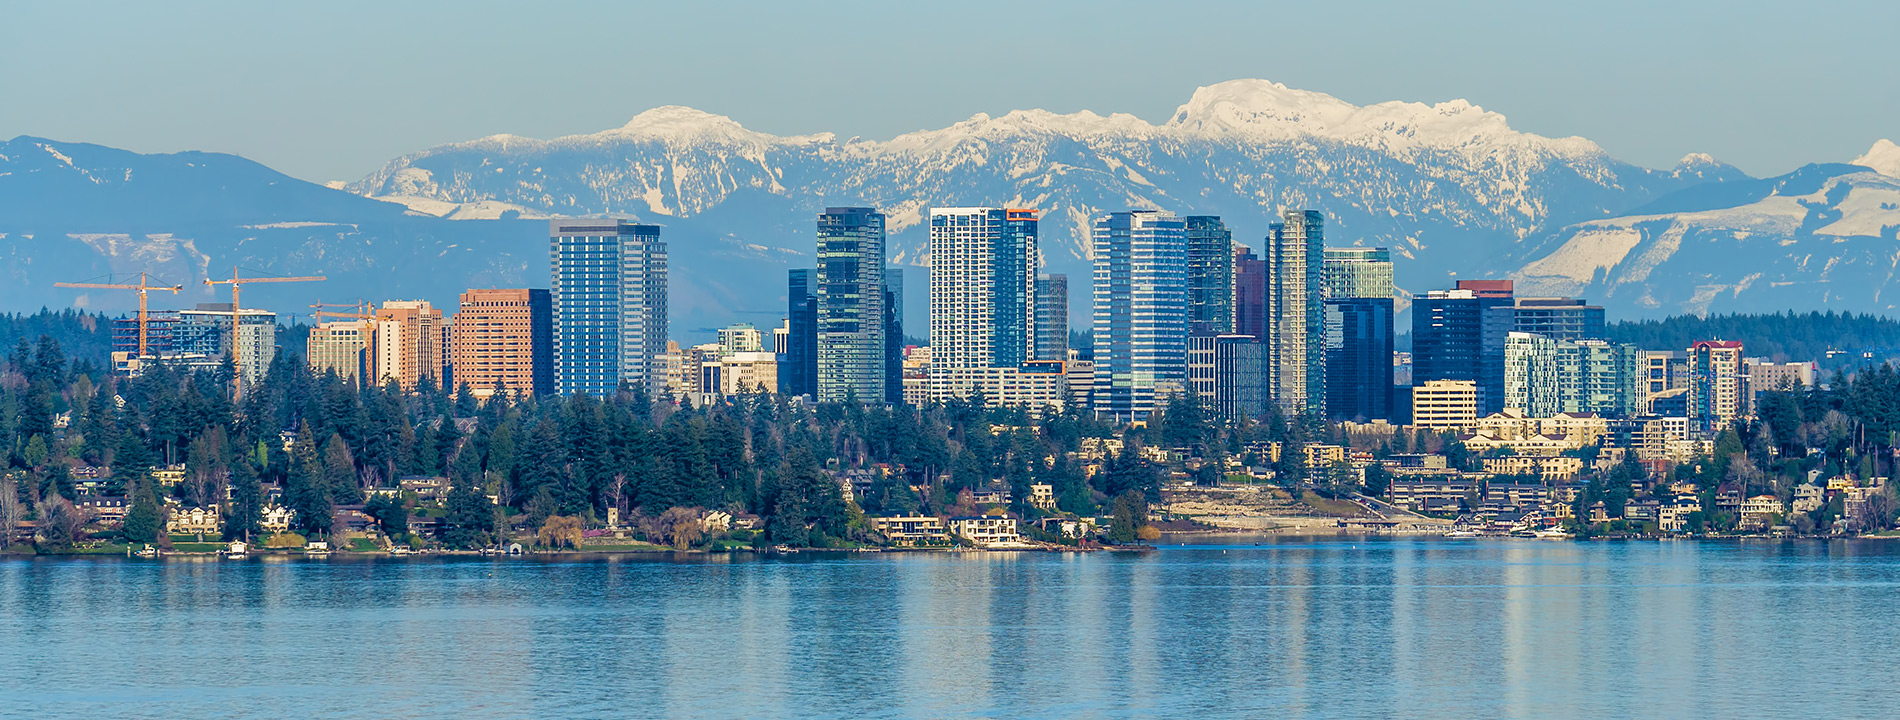 The skyline of Bellevue with mountains in the back.